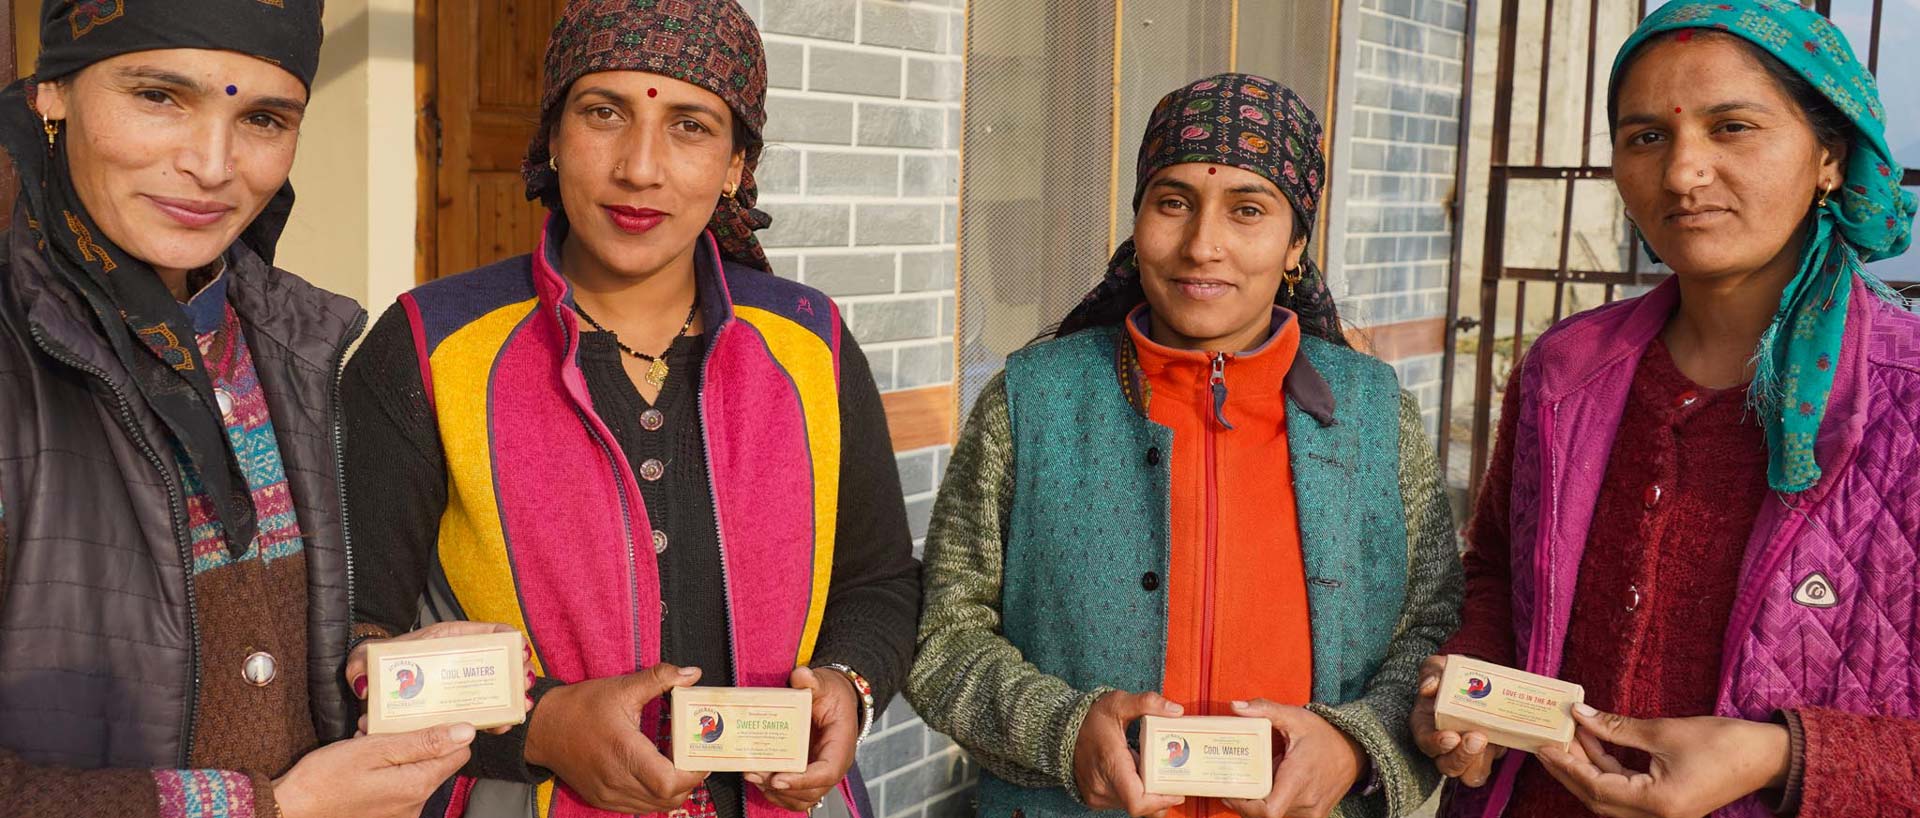 Women of Tirthan valley